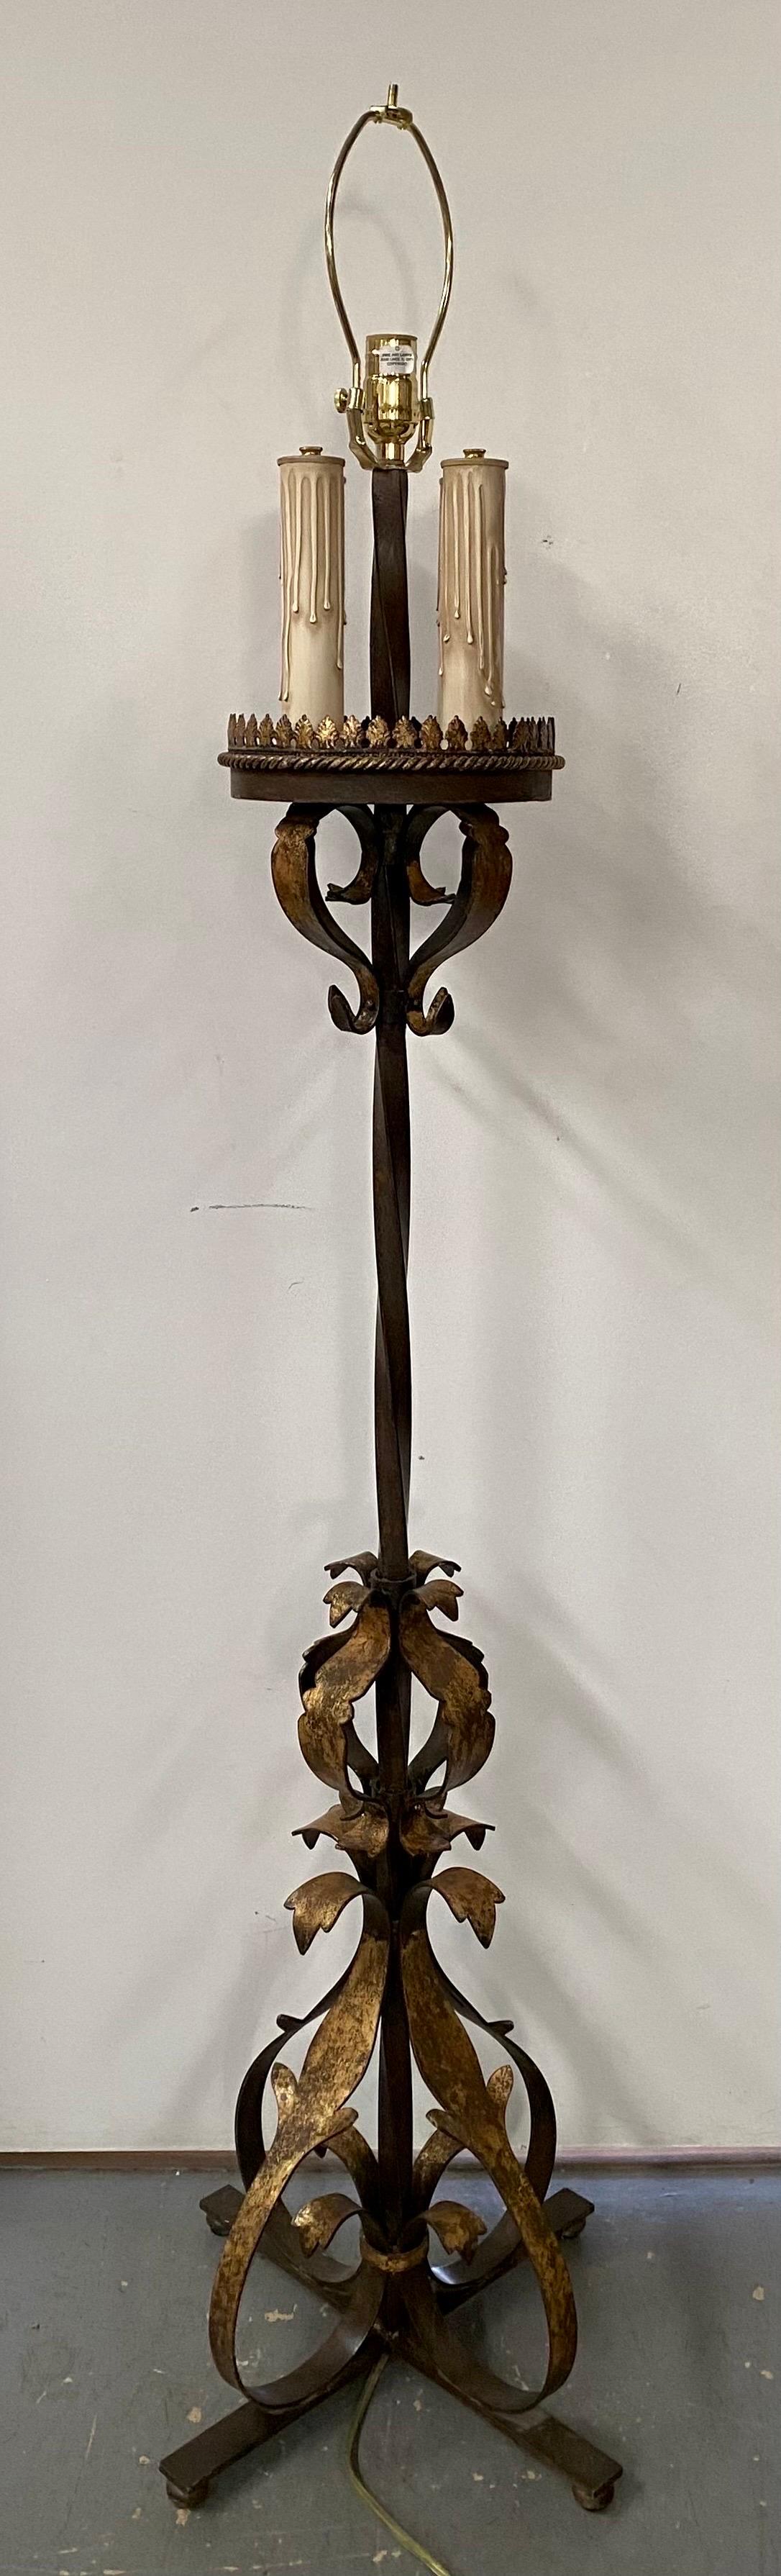 Spanish Baroque Style Wrought Iron Floor Lamp by Fine Art Lighting, a Pair  For Sale 3